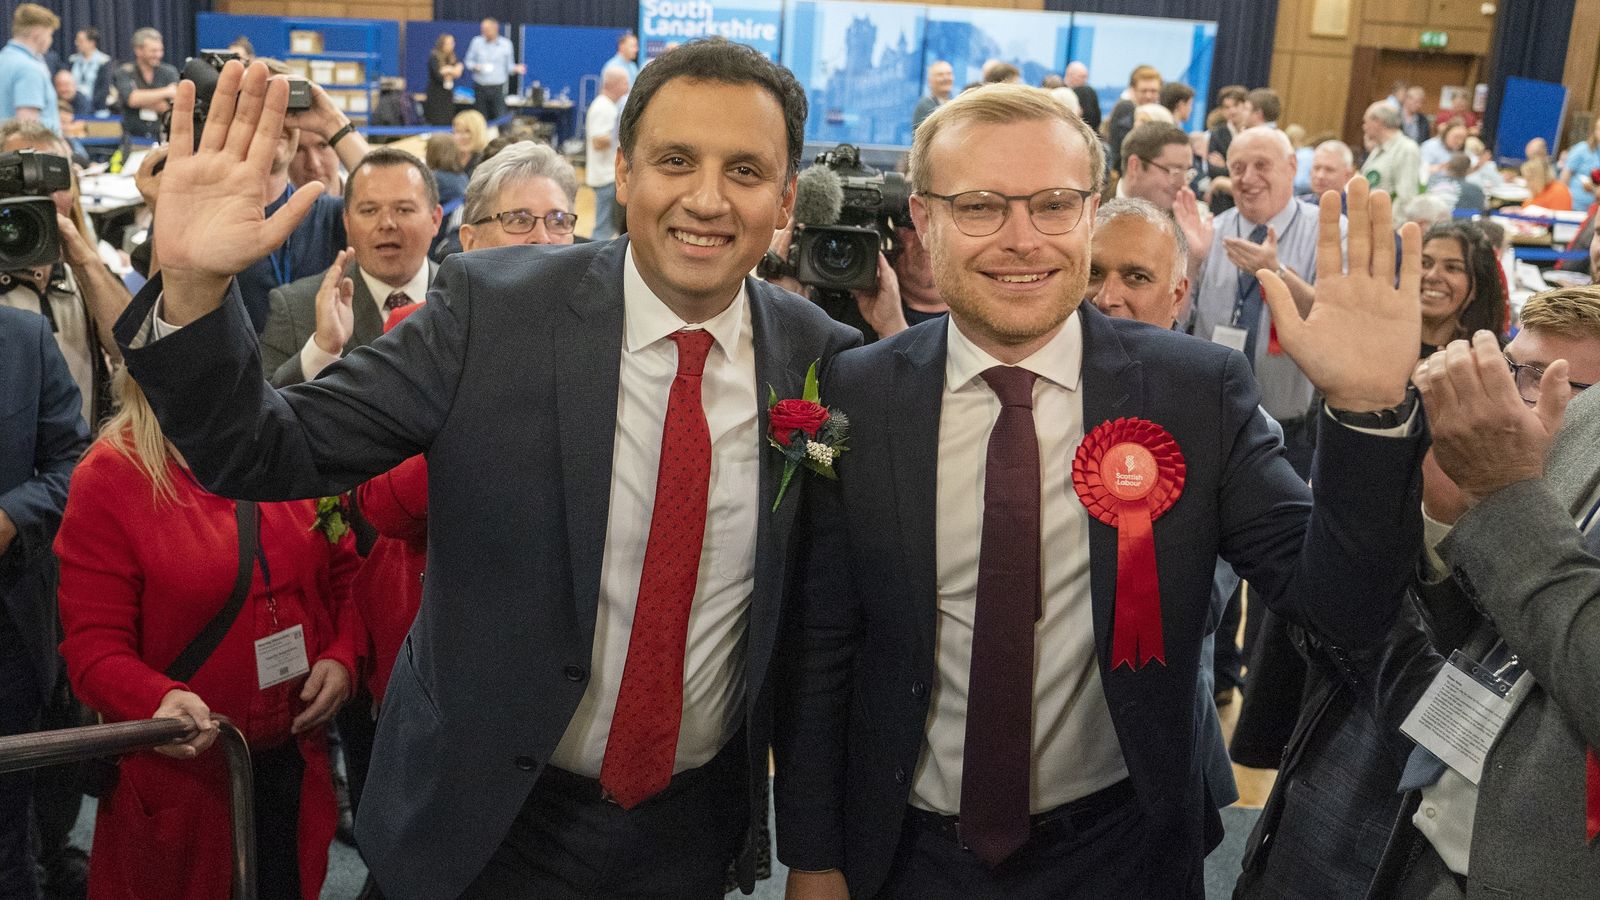 Rutherglen and Hamilton West by-election: Labour wins Westminster seat replacing Margaret Ferrier